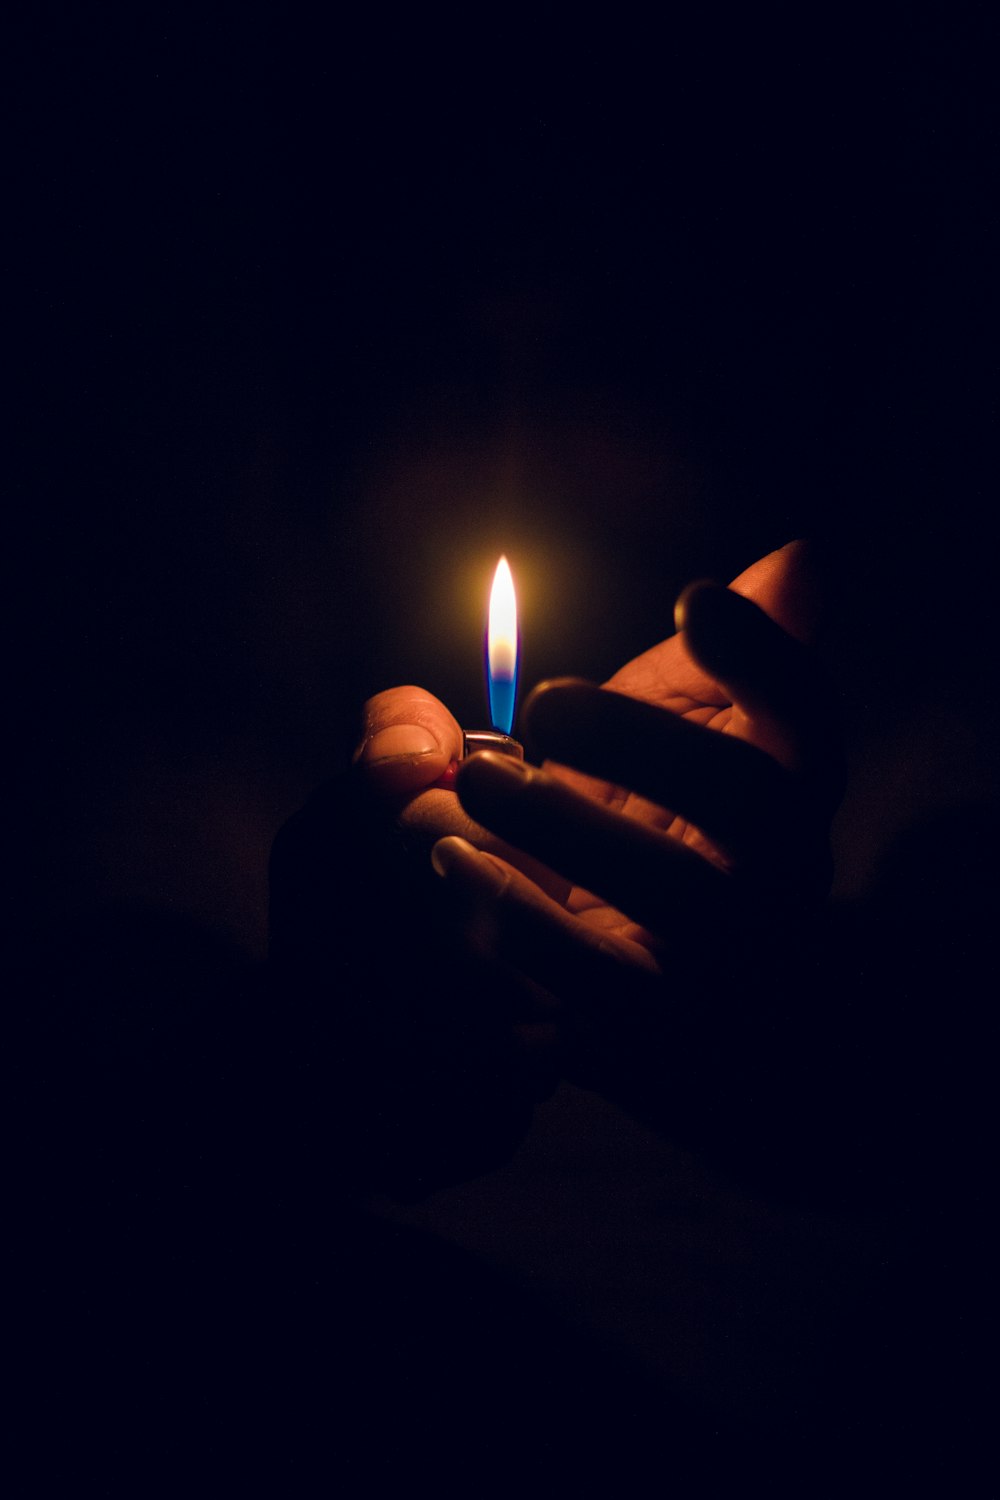 person holding lighted candle in dark room